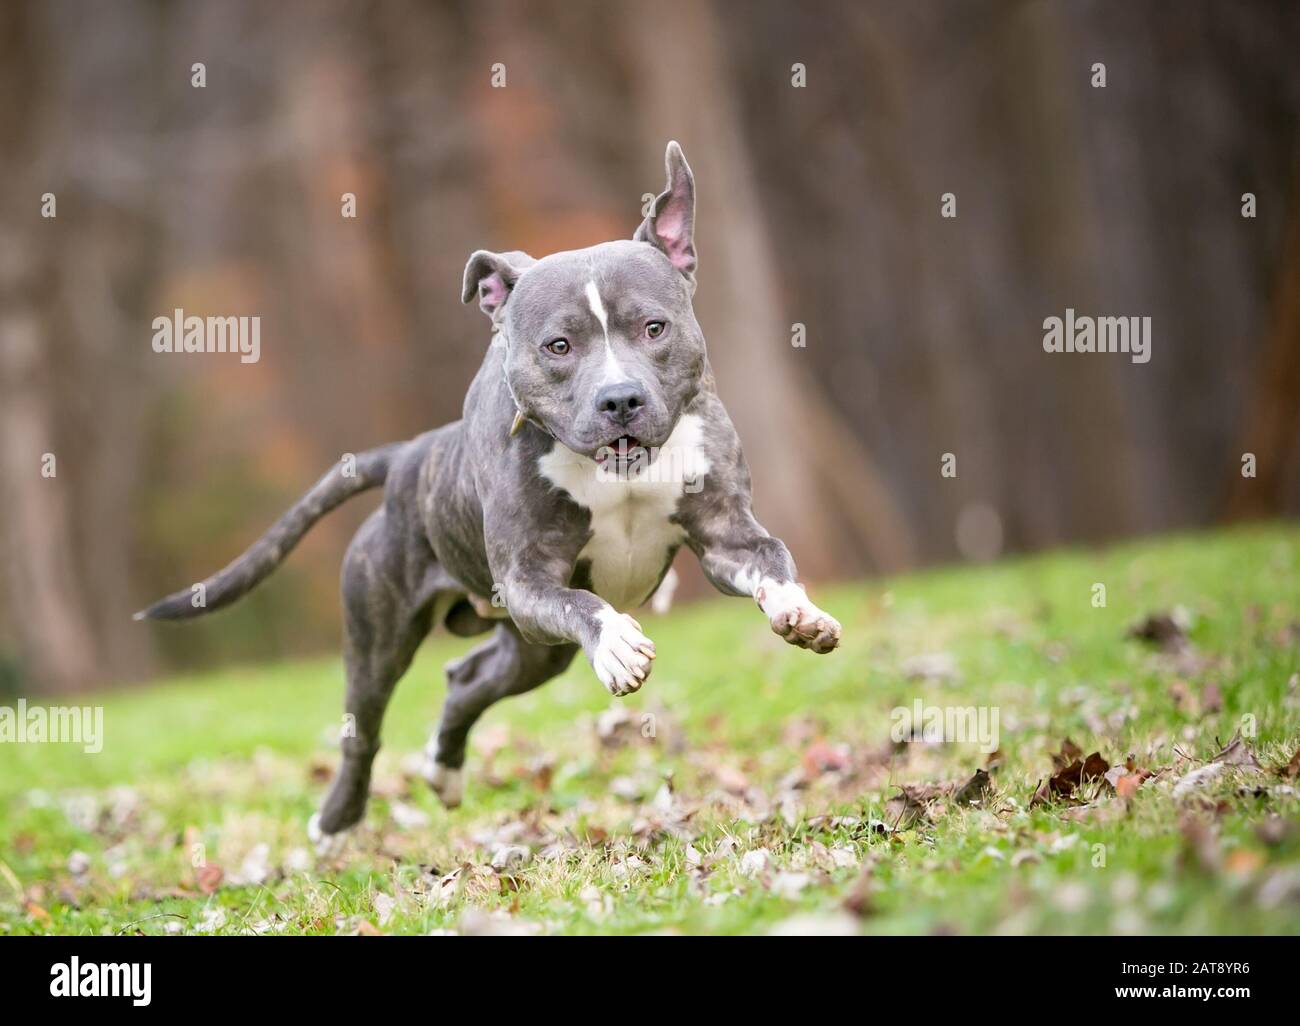 A blue brindle and white Pit Bull Terrier mixed breed dog leaping and running outdoors Stock Photo